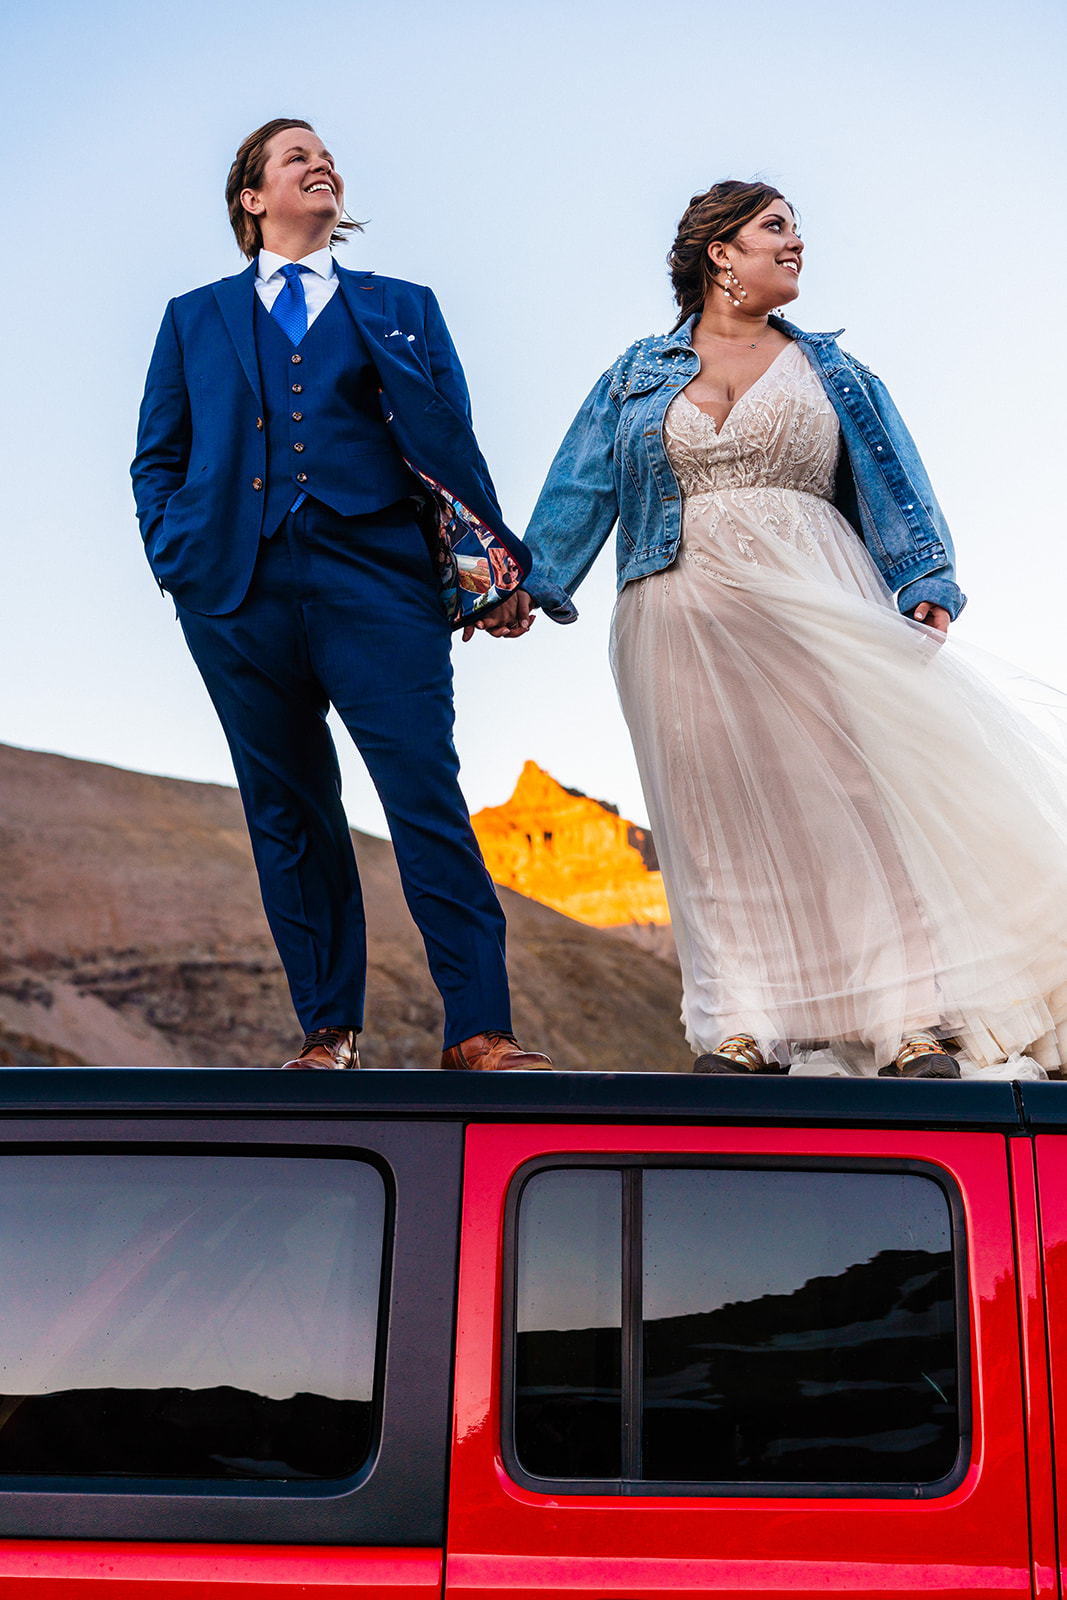 Lesbian couple standing on their red Jeep for their off-road elopement